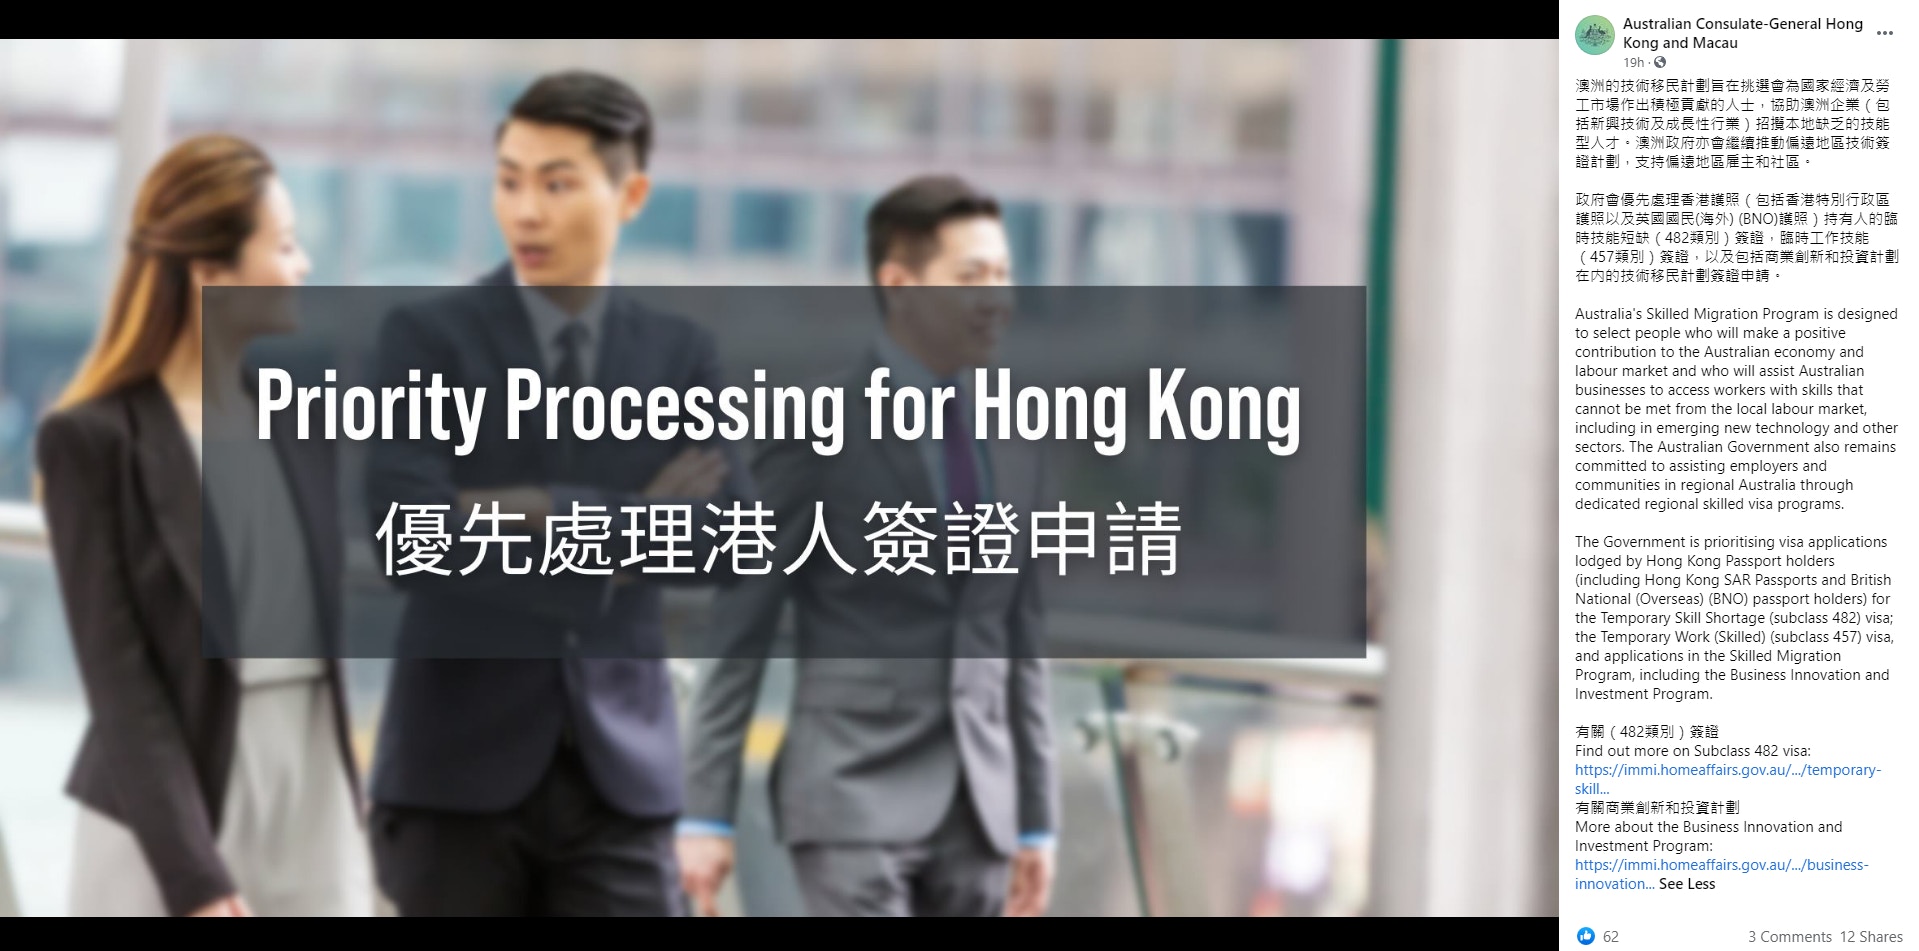 Immigration wave｜The Australian confirms that the BNO has the to approve the skilled immigration visa Hong Kong people - Limited Times